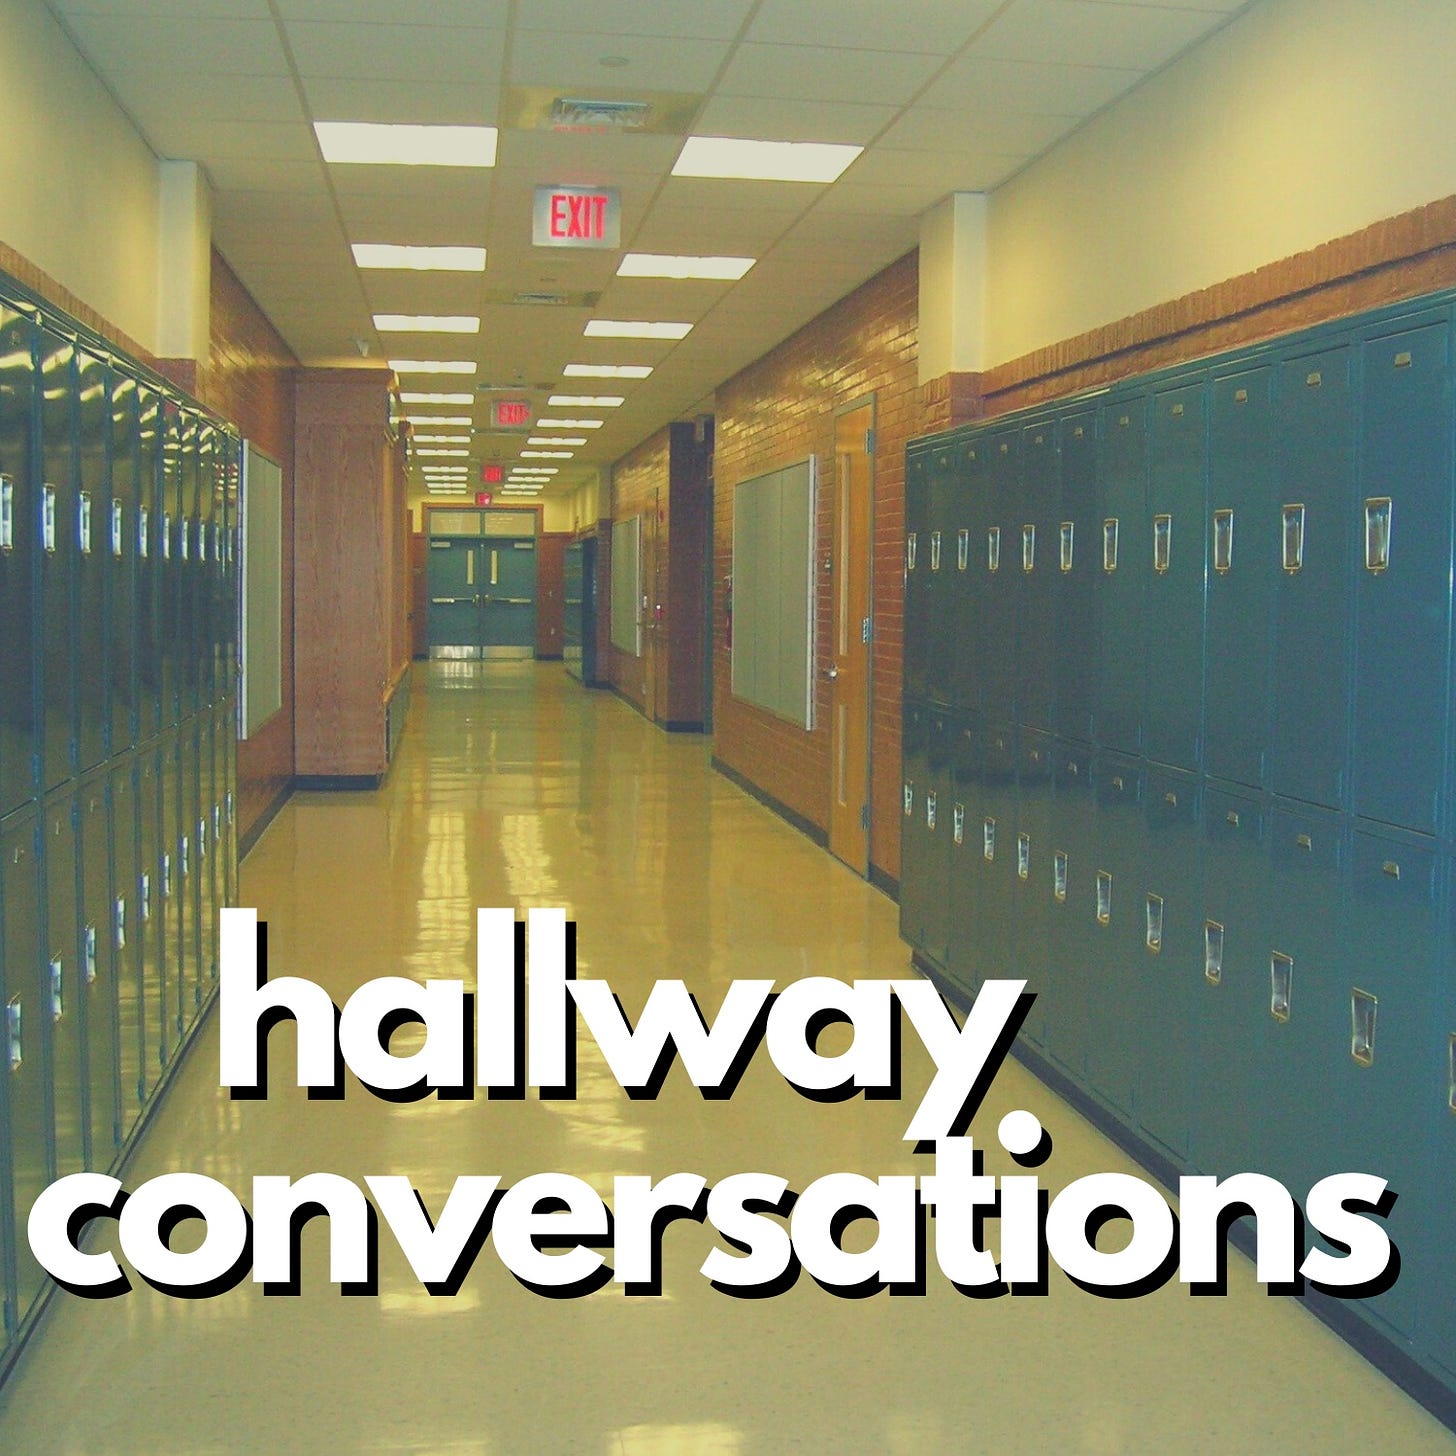 The cover image for the Hallway Conversations podcast: a school hallway lined with lockers